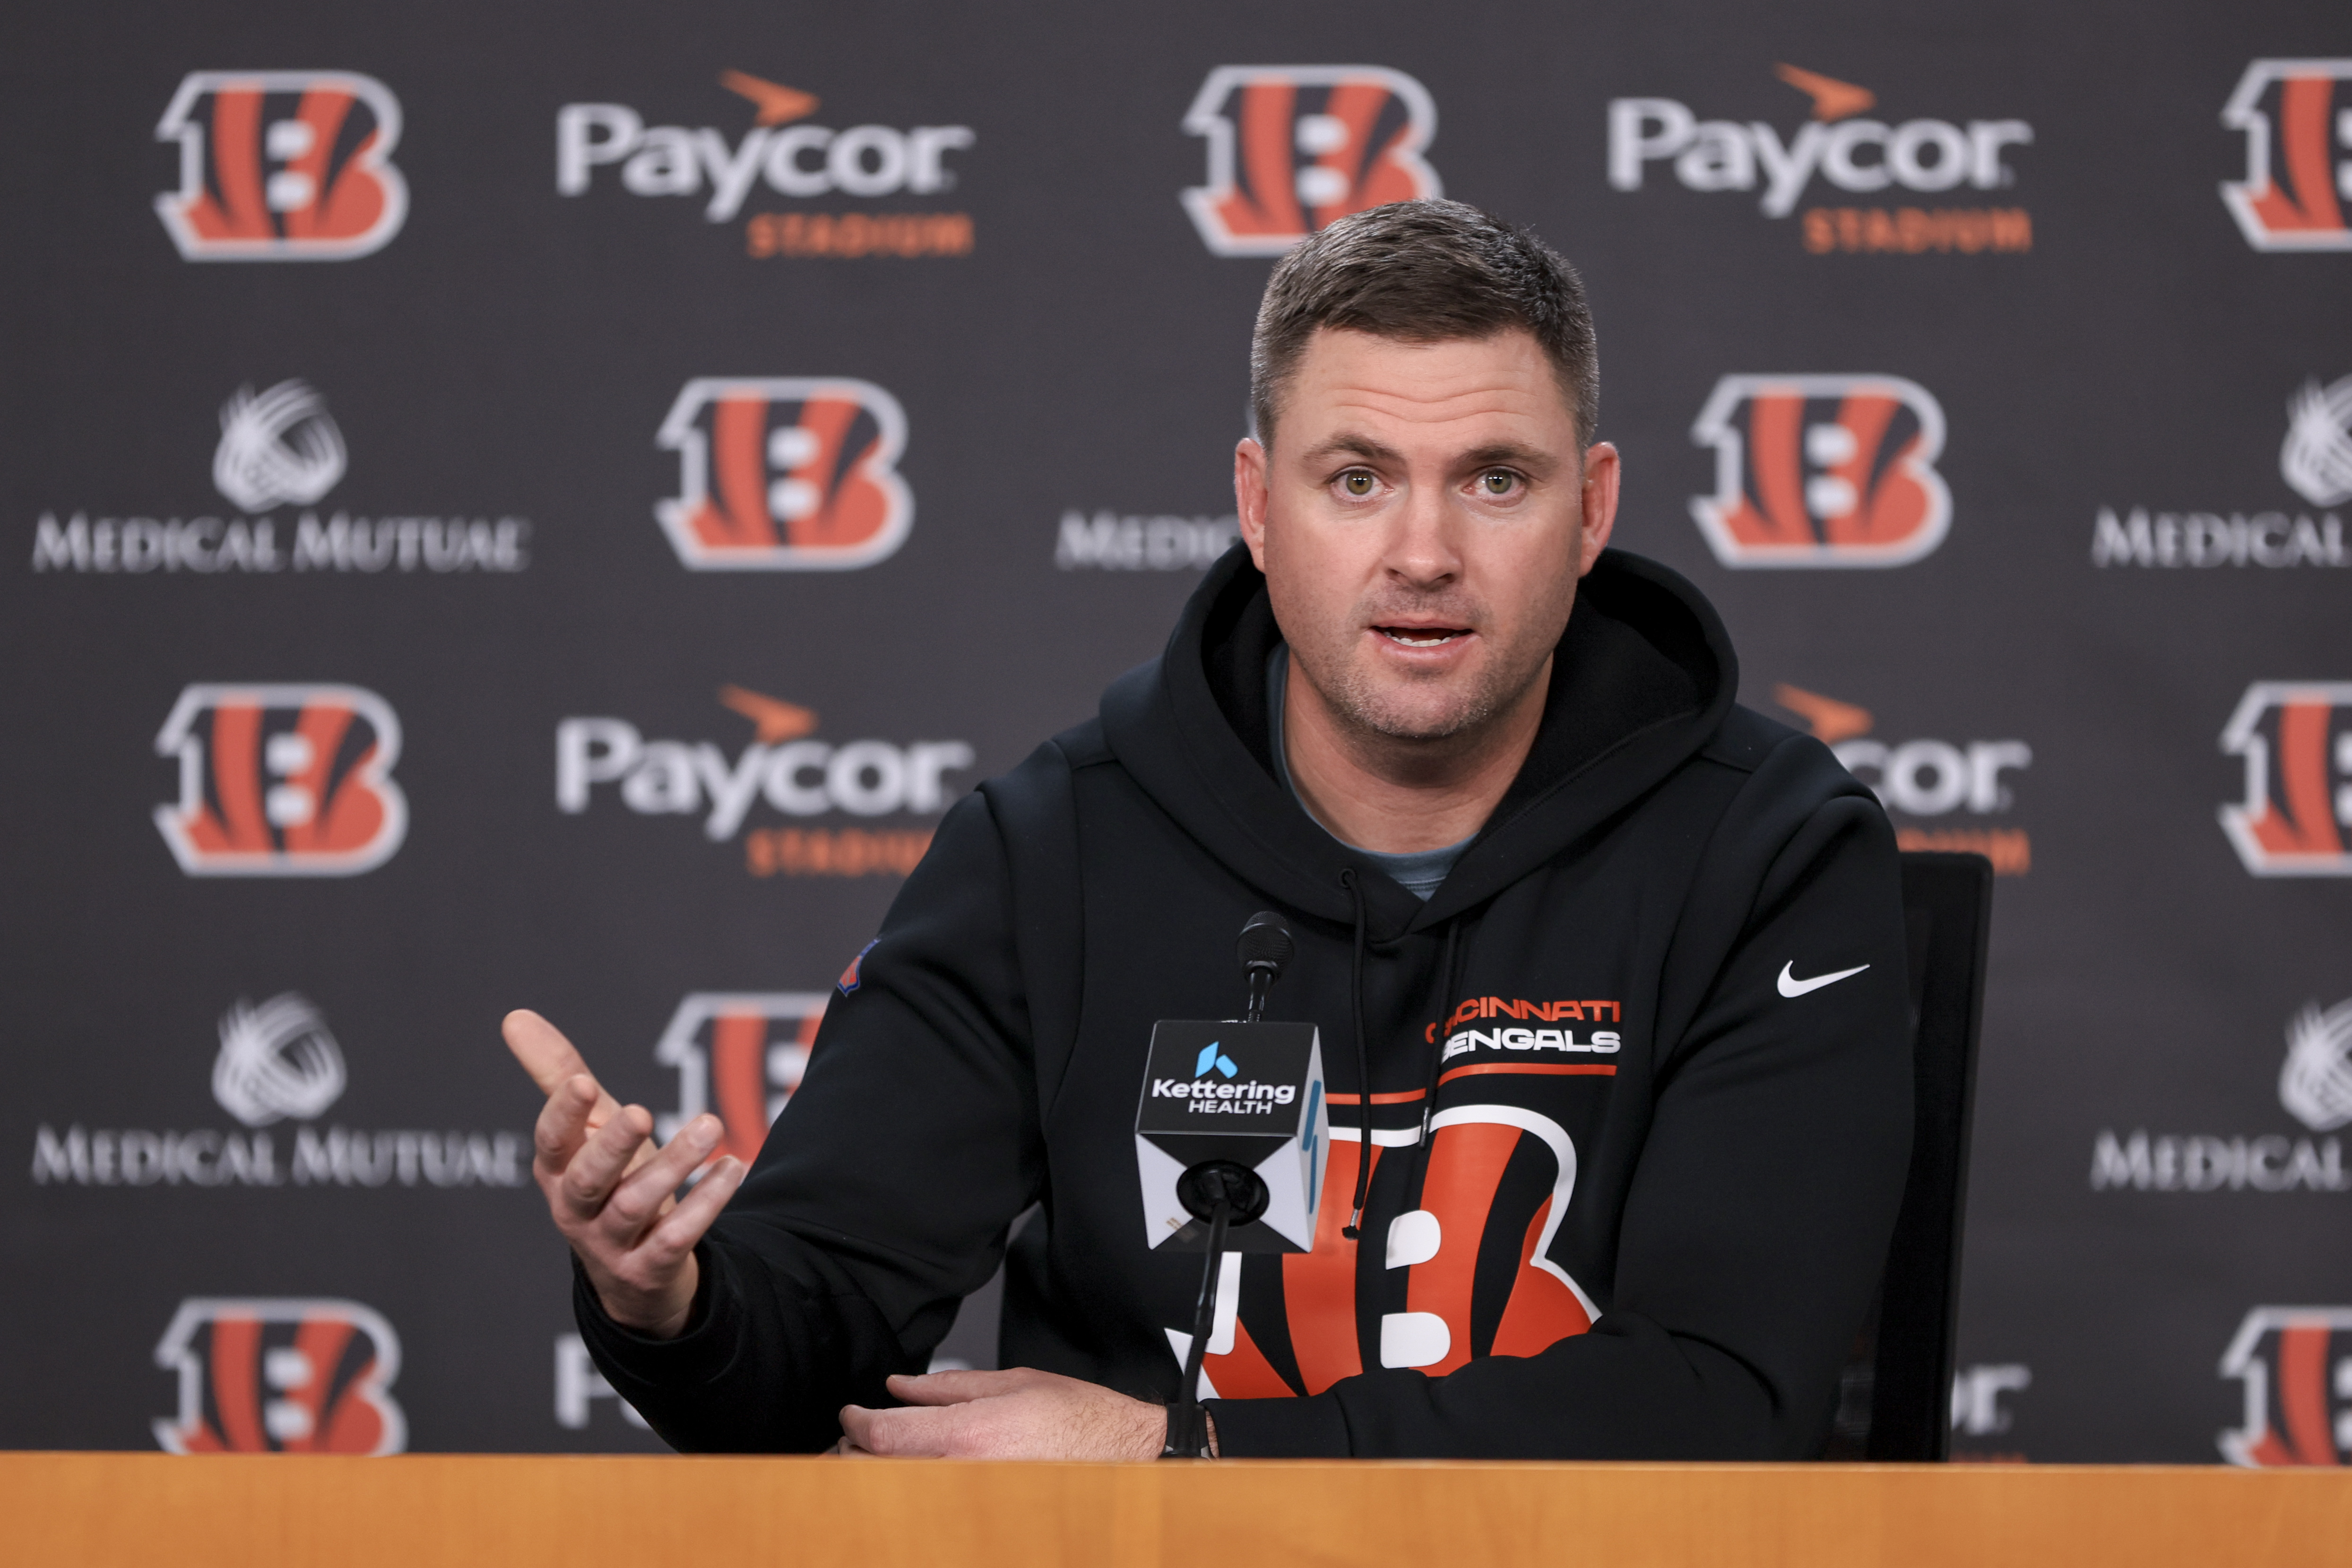 Bengals win AFC North, AFC Championship Game possibly at neutral